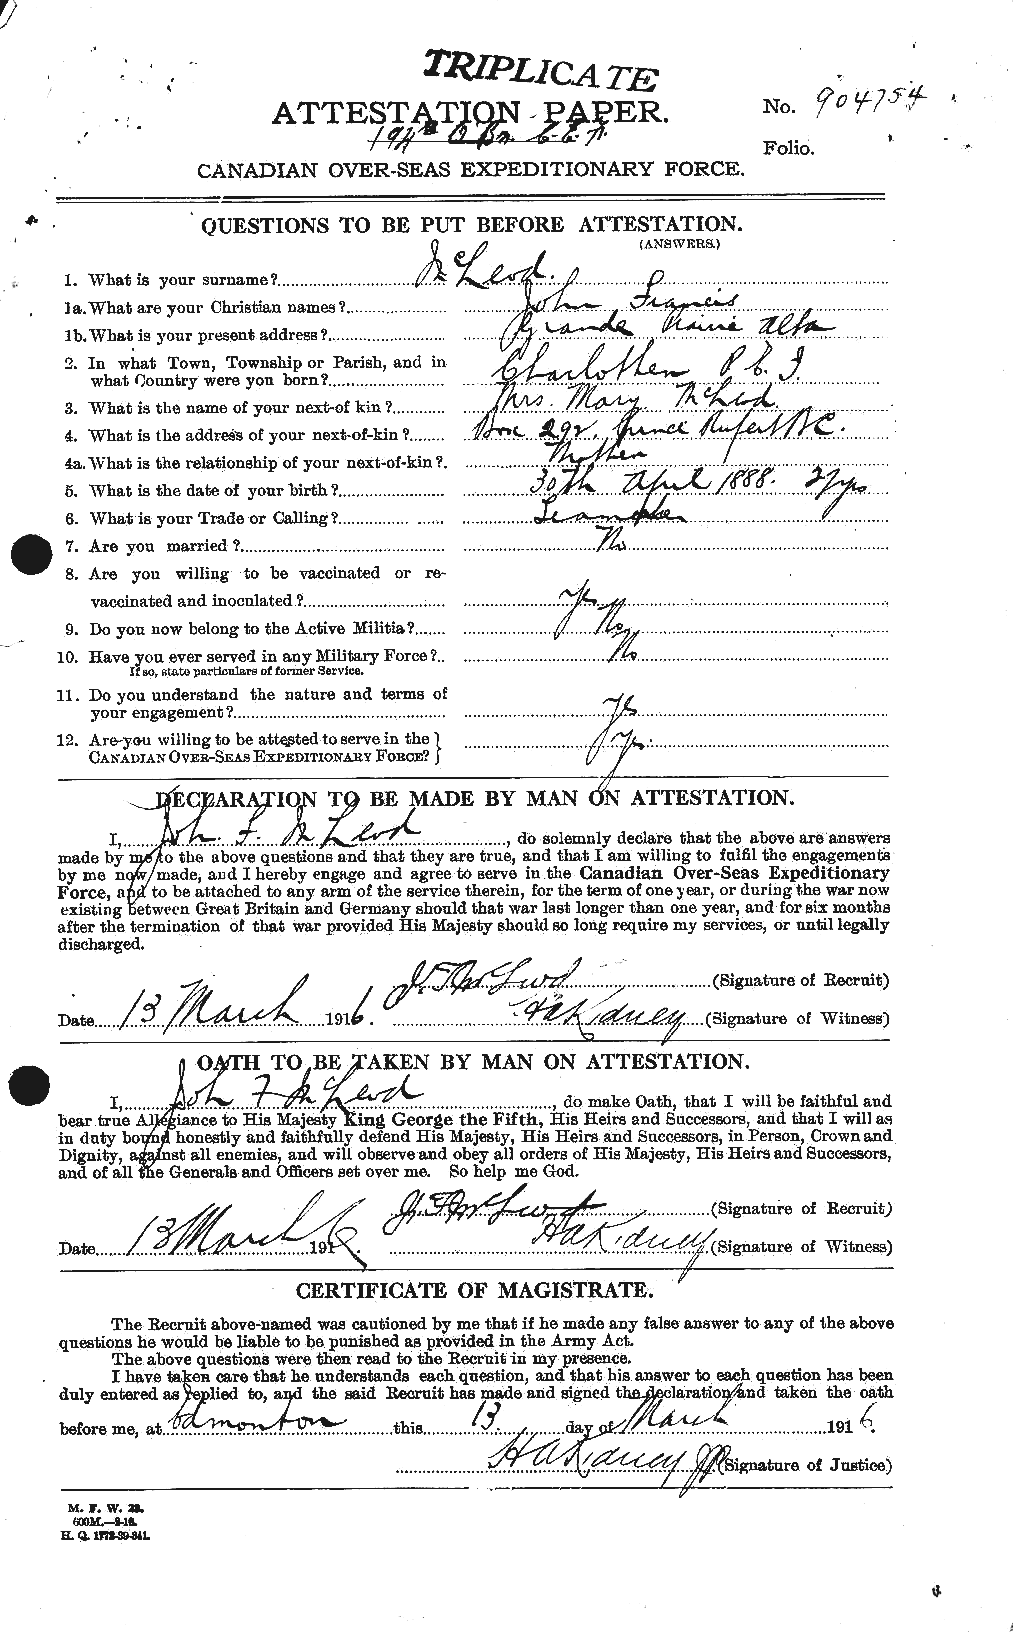 Personnel Records of the First World War - CEF 535000a